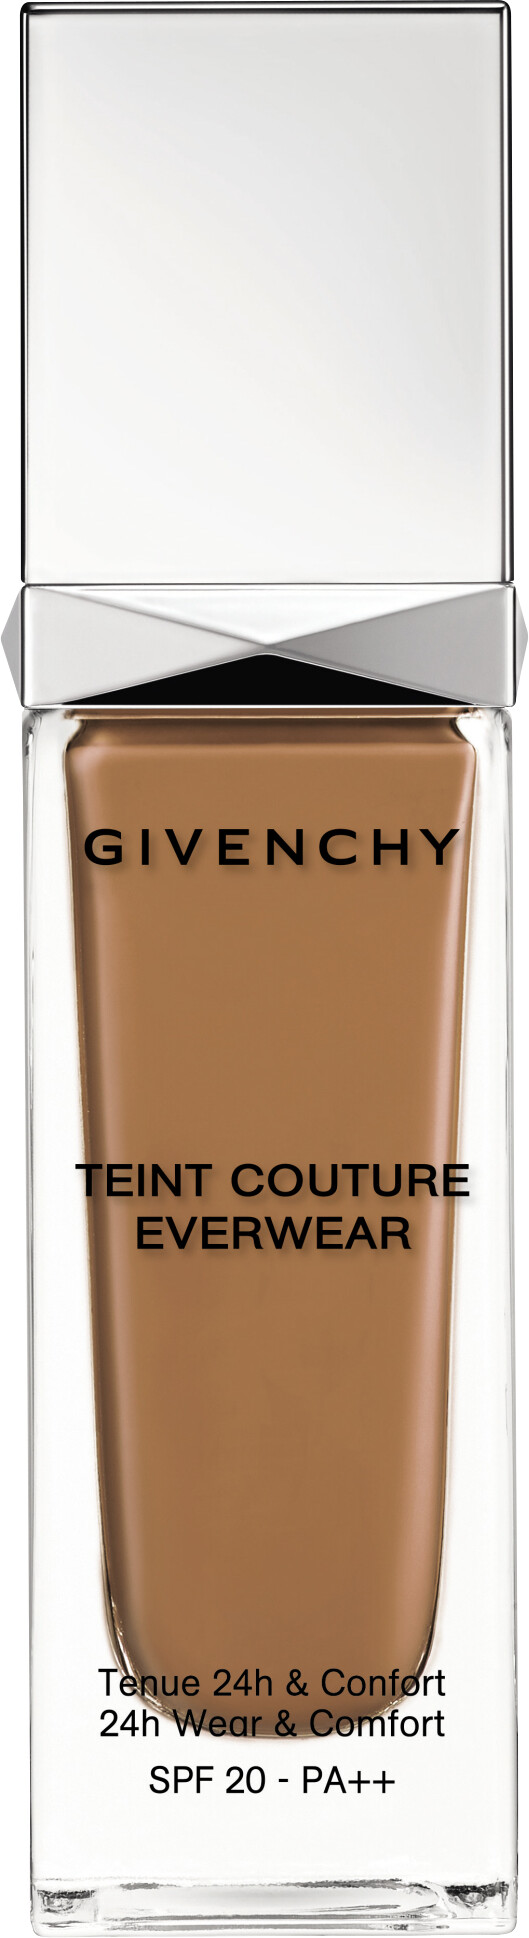 GIVENCHY Teint Couture Everwear 24h Wear & Comfort Foundation SPF20 30ml P395